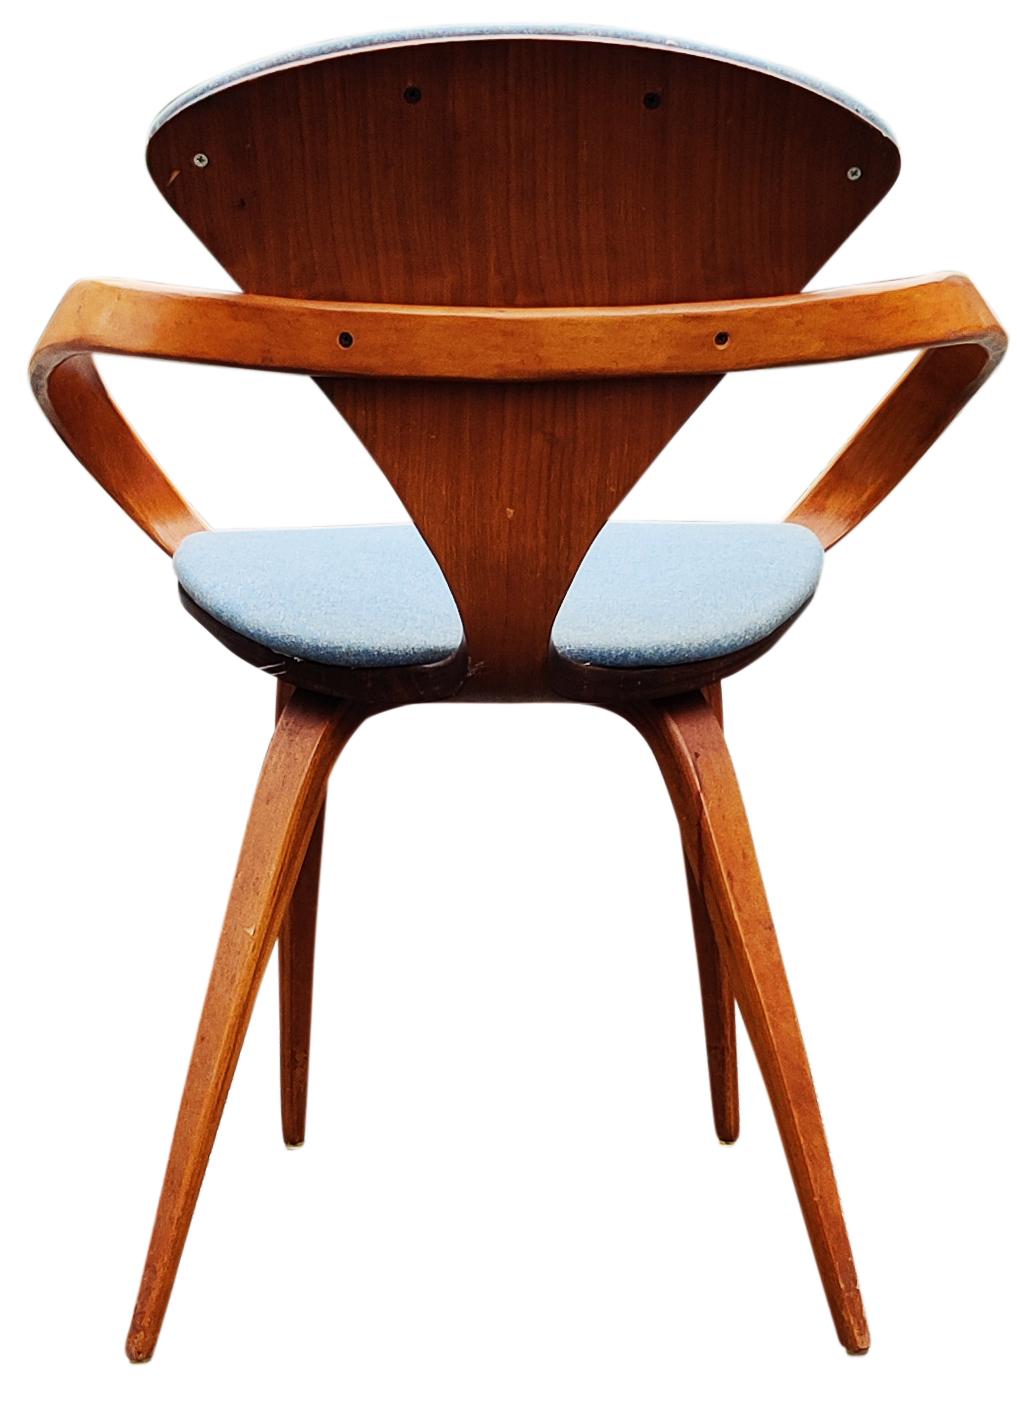 American Norman Cherner Pretzel Armchair for Plycraft Walnut Upholstery 1960s MCM Classic